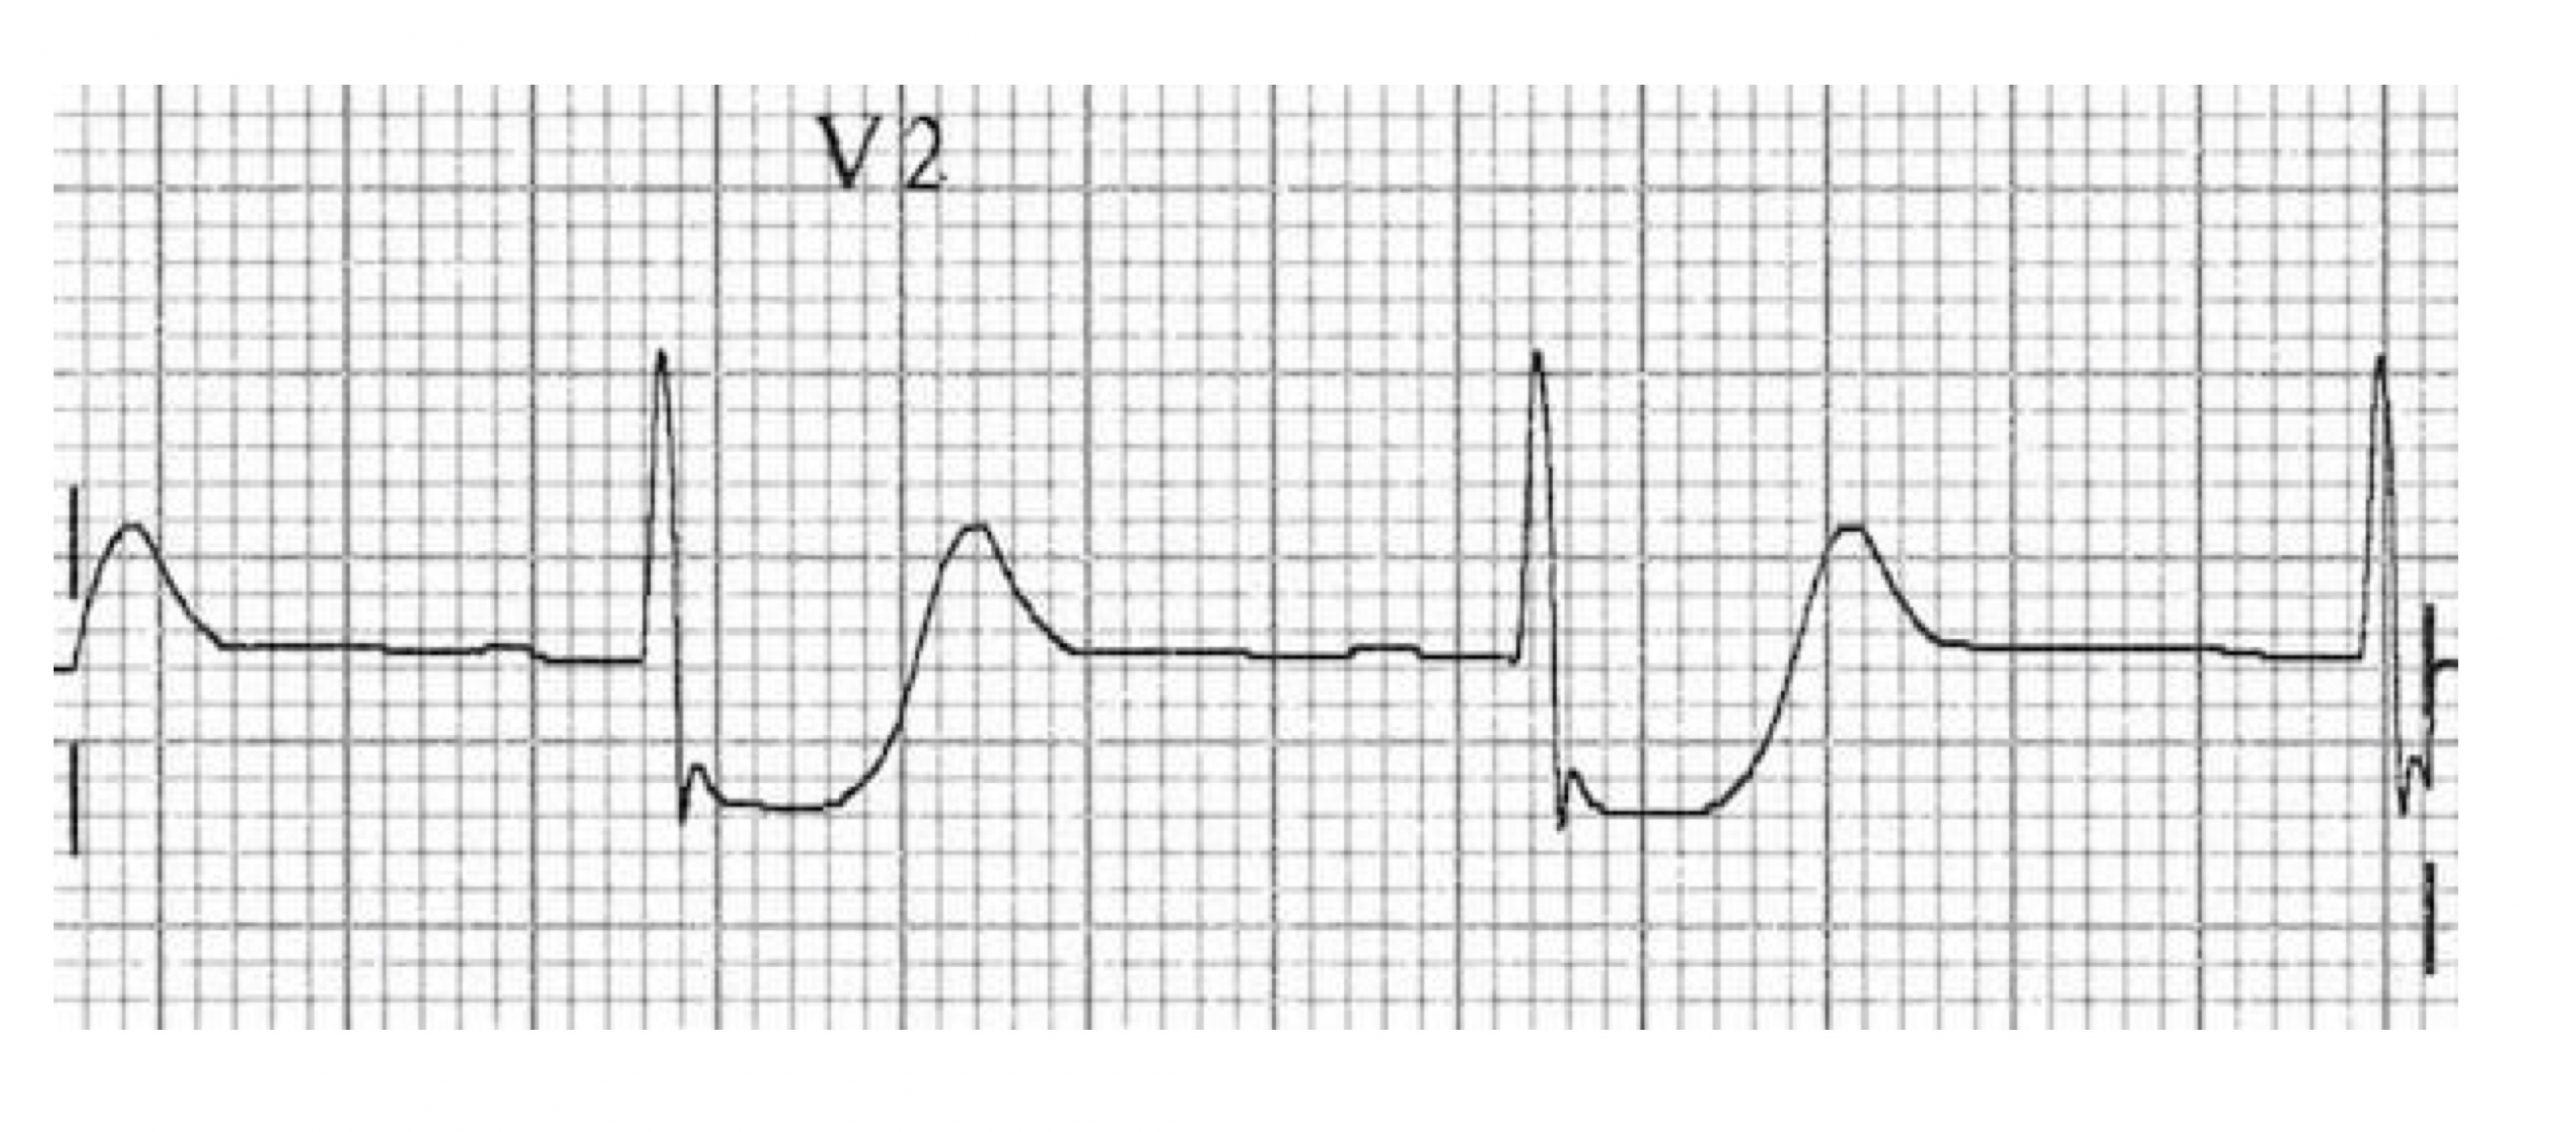 Lead V2 of an ECG is shown with two complete depolarizations. There is distinct depression of the S-T segment which appears much lower than the isoelectric baseline indication of a posterior infarction.